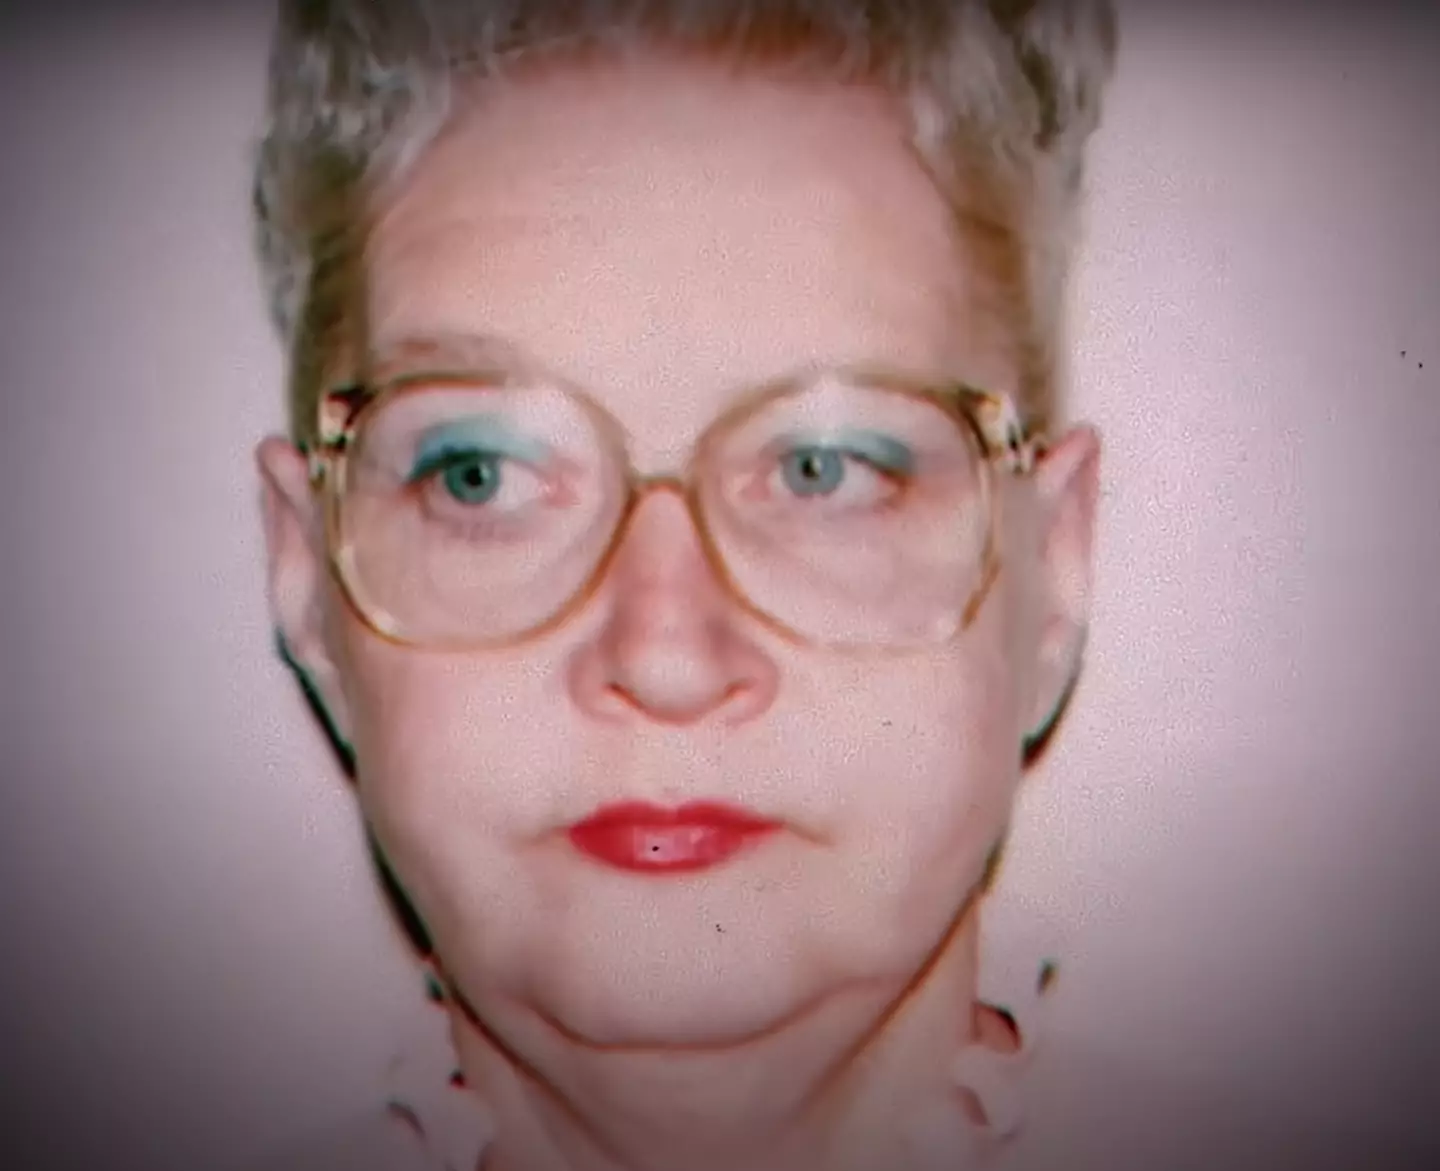 The first episode is about Dorothea Puente's murders. (